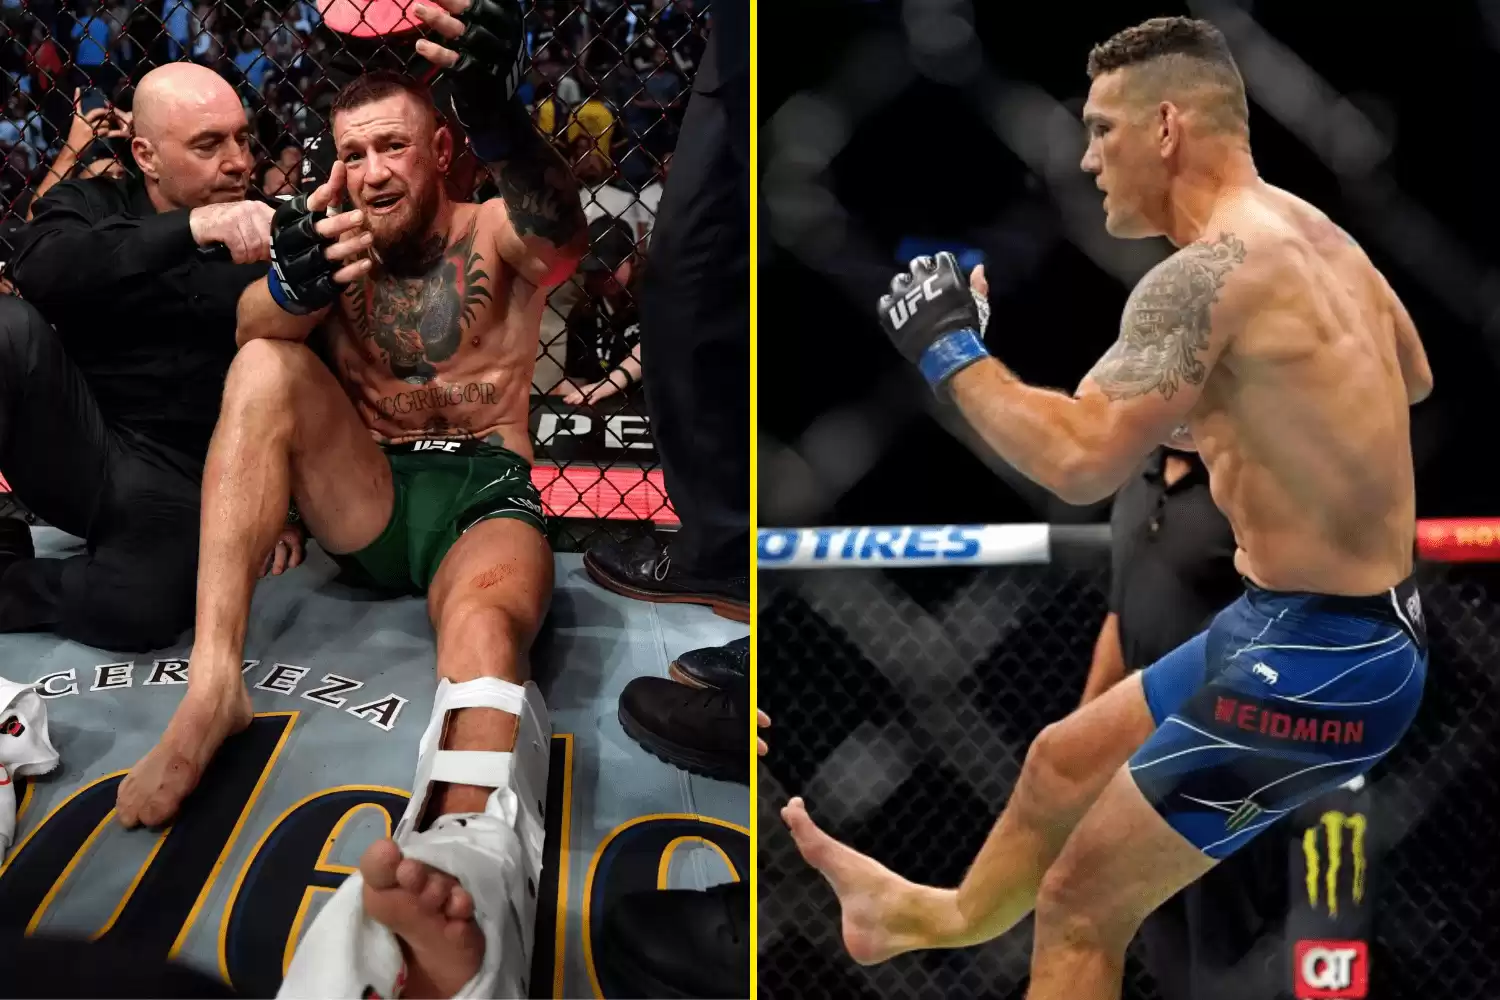 "Joe Rogan relieved by Conor McGregor & doctor discussing Chris Weidman's leg concerns at UFC 292"